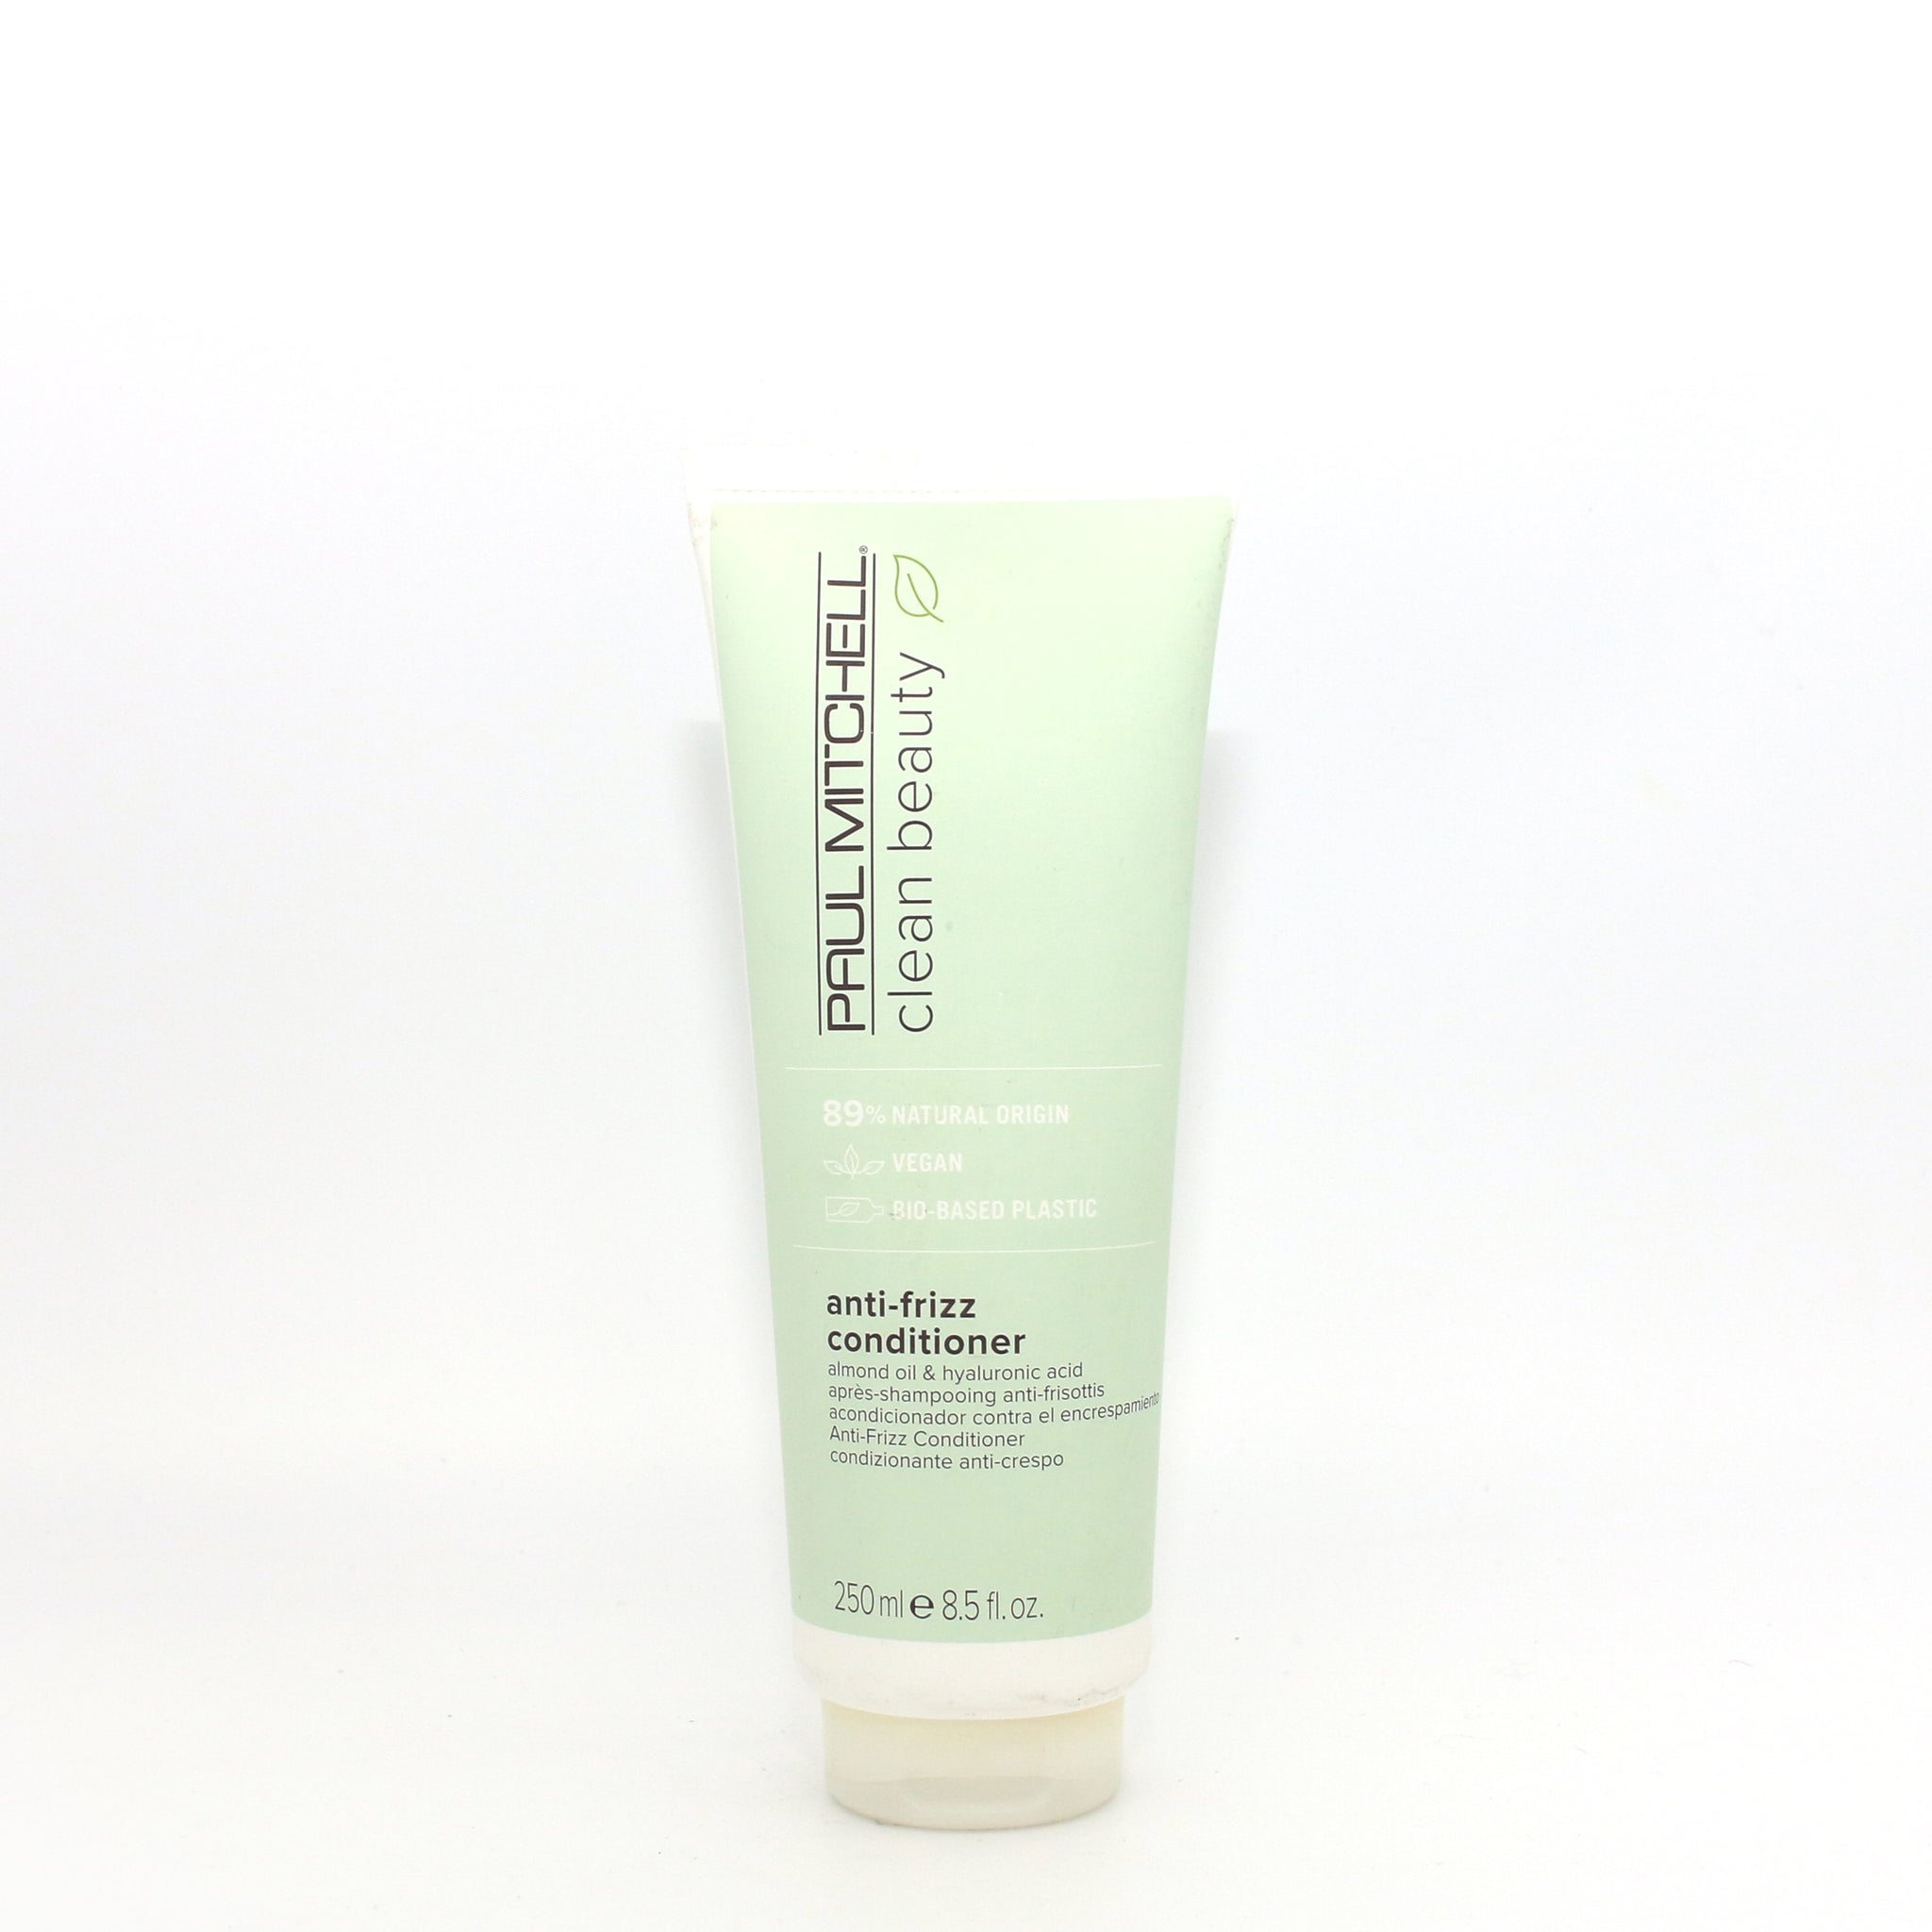 PAUL MITCHELL Clean Beauty Anti Frizz Conditioner 8.5 oz